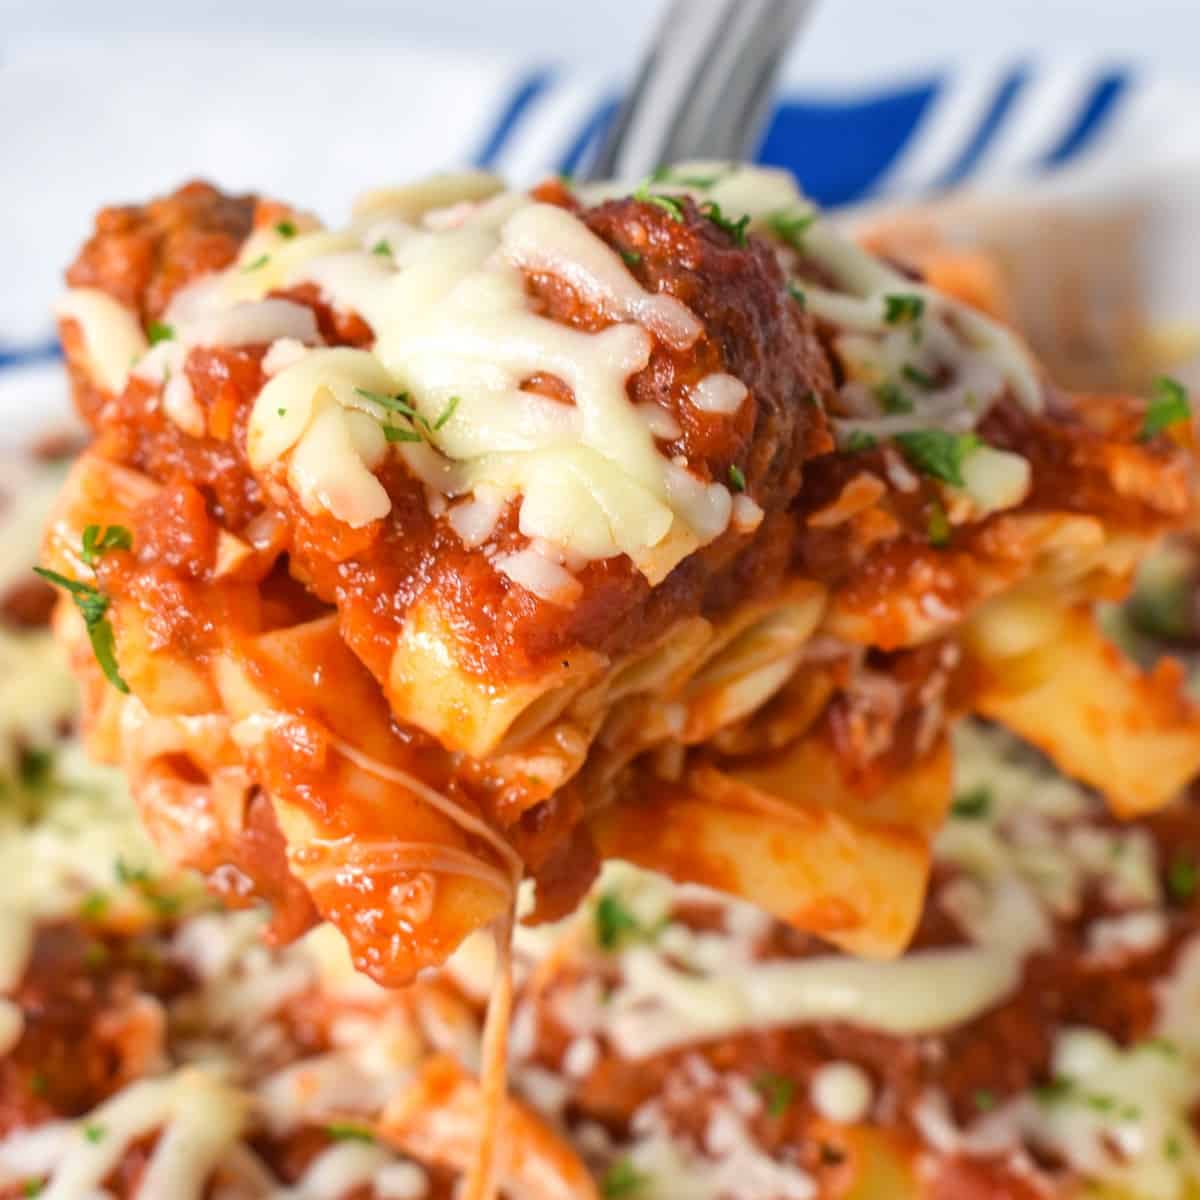 A close up image of a serving of the baked pasta with meatballs.